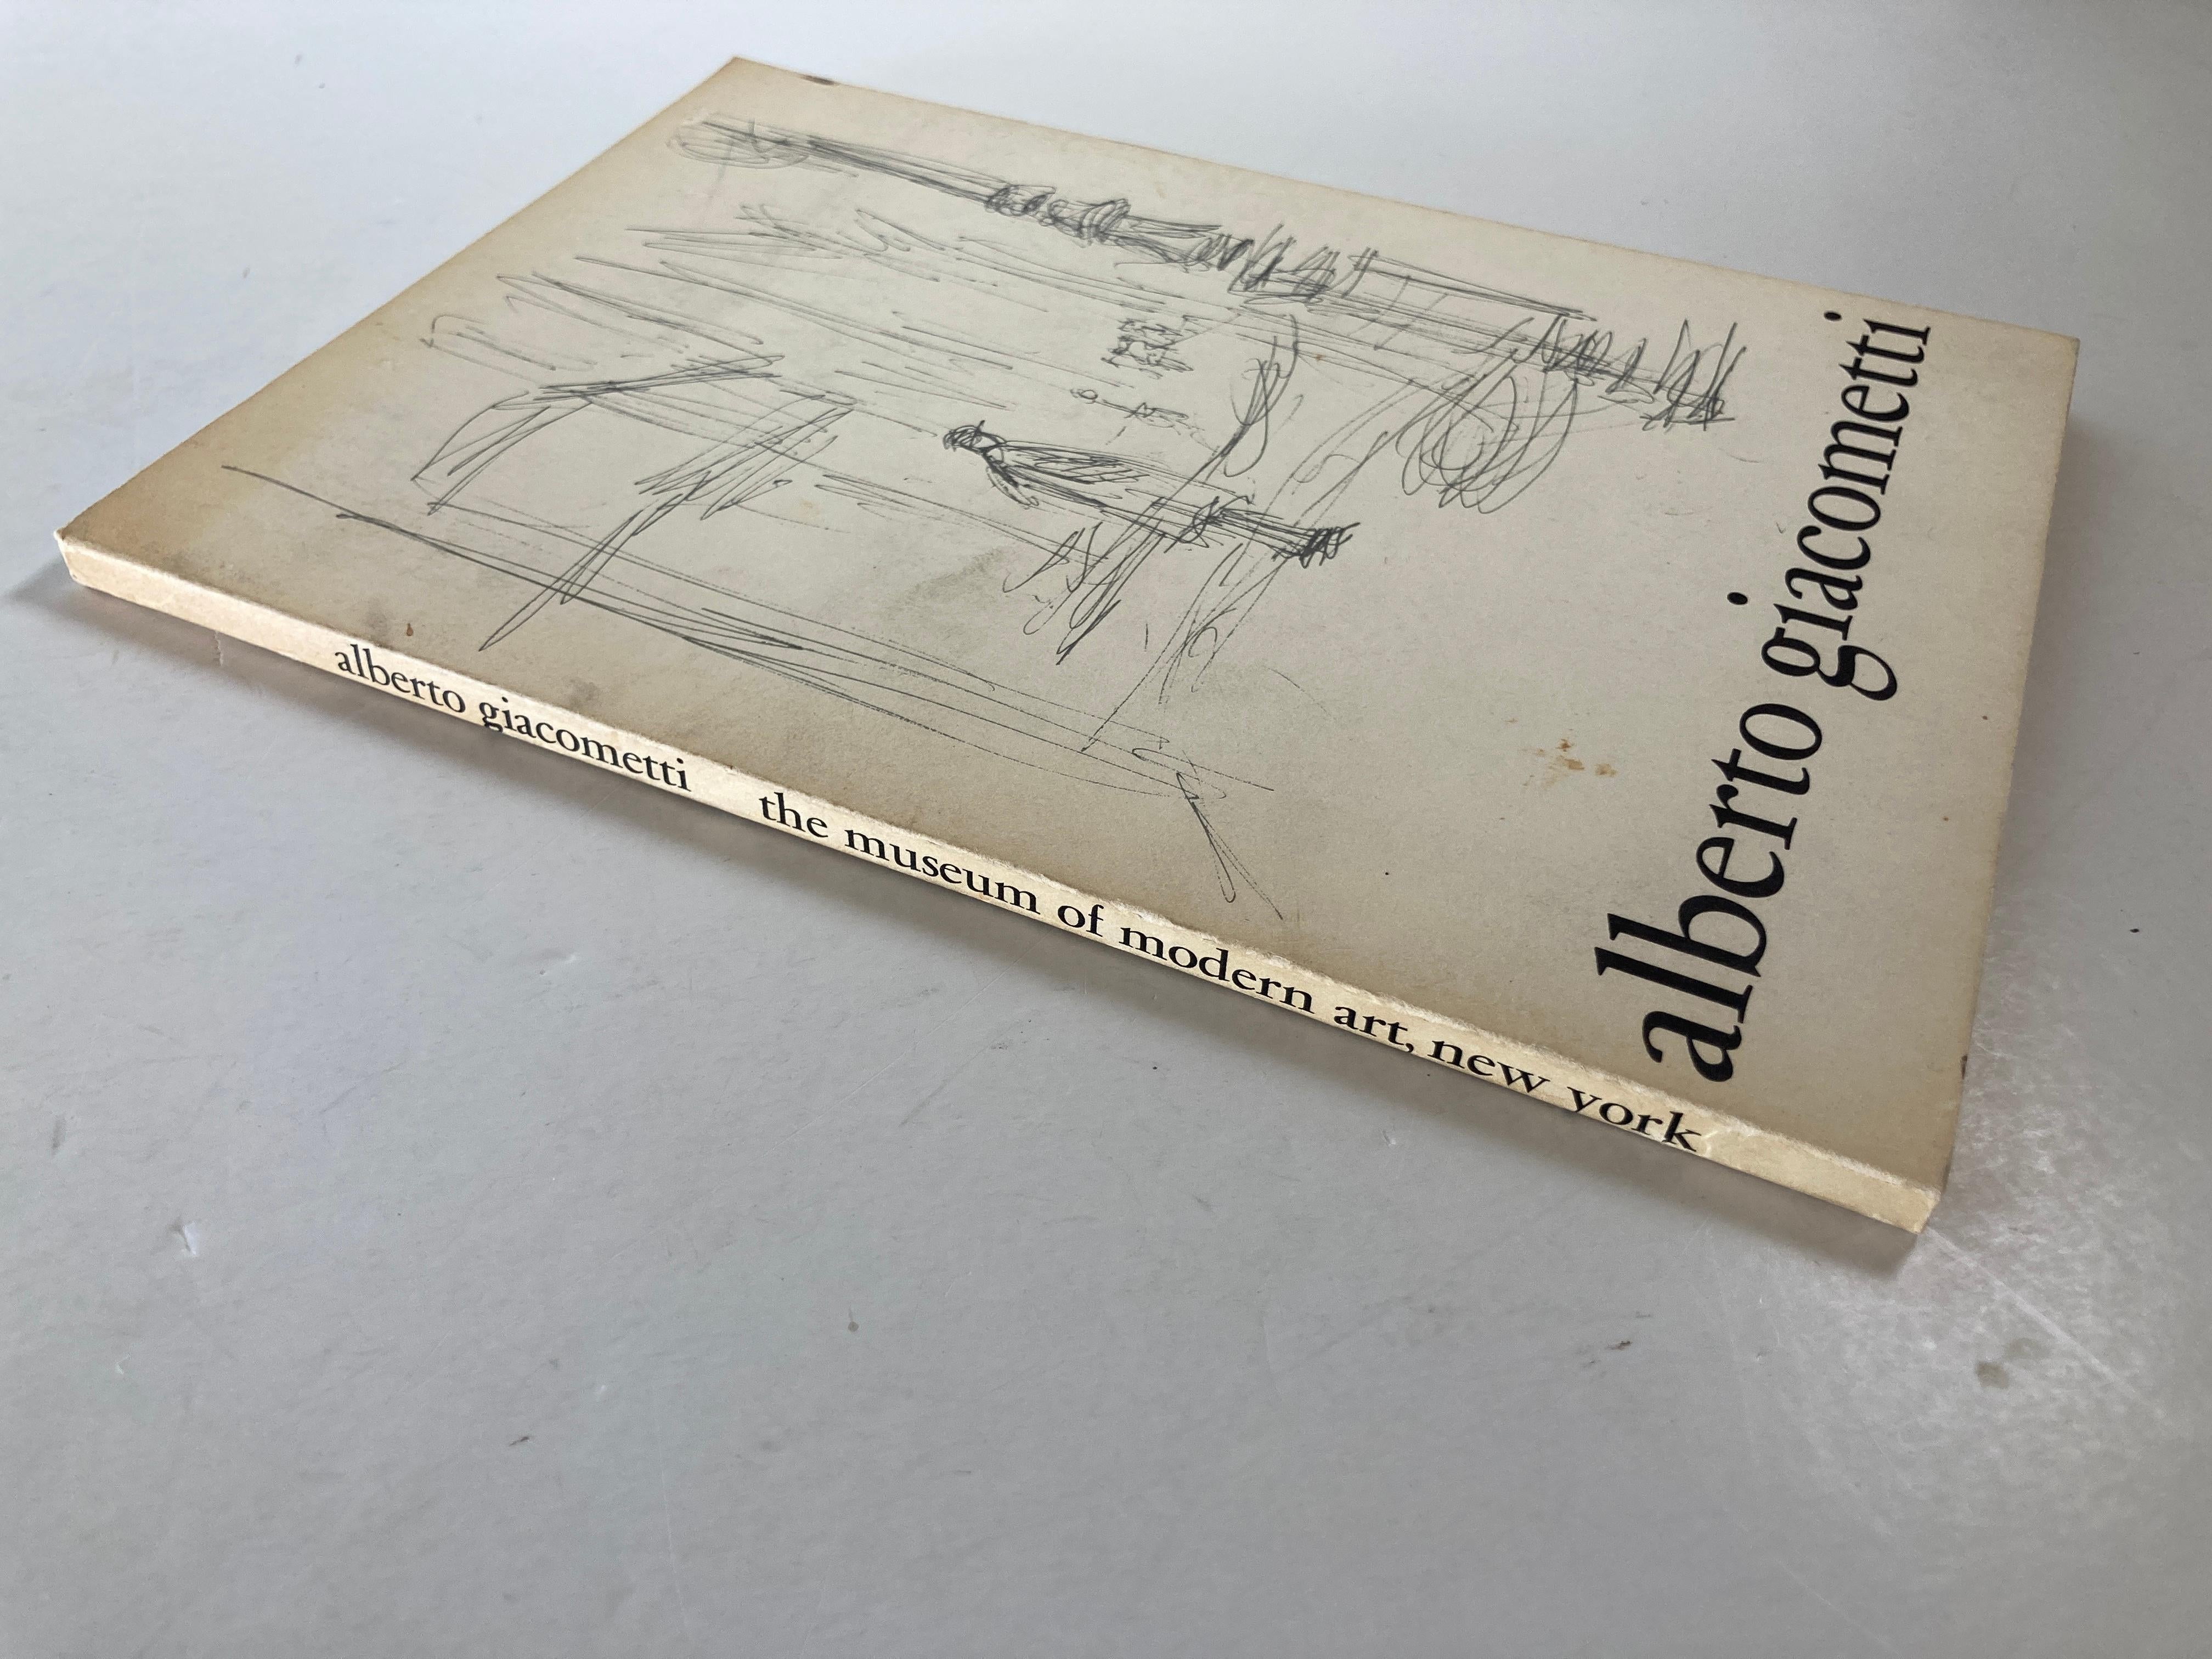 Alberto Giacometti Collector vintage art book 1965.
120 pages 112 illustrations 16 in color. Minor discoloration and wear to the cover and edges now protected with a Mylar cover. Published on the occasion of the exhibition from the Museum of Modern